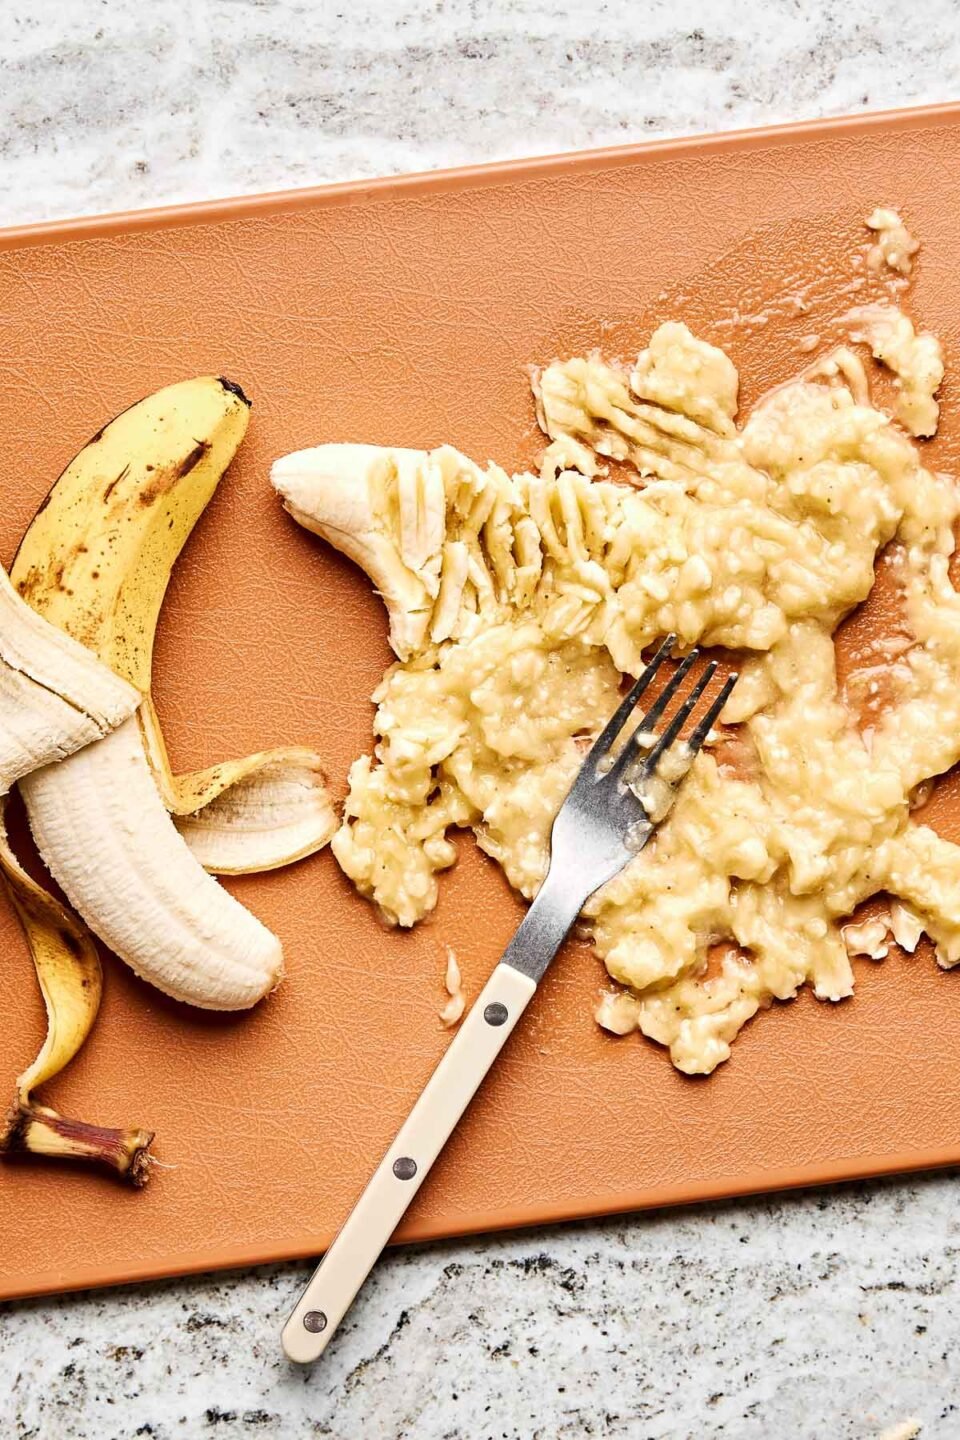 An overhead shot of a half-peeled banana and mashed banana on a light brown cutting board atop a grey textured surface.